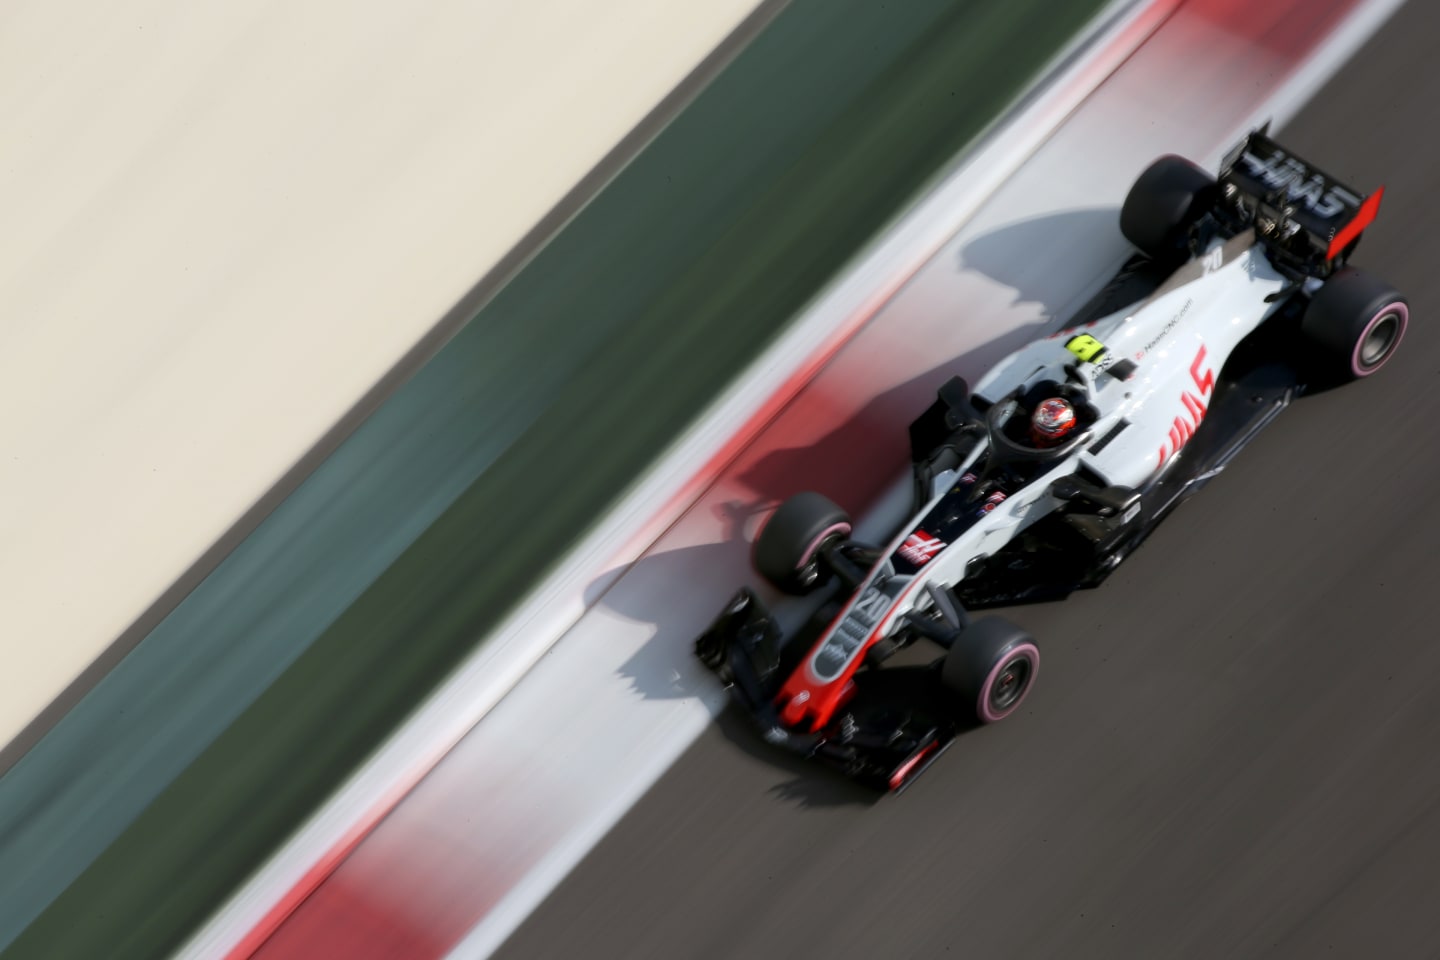 In 2018, Haas had their most successful season yet, finishing the championship fifth with 93 points, which was more than their previous two seasons put together.